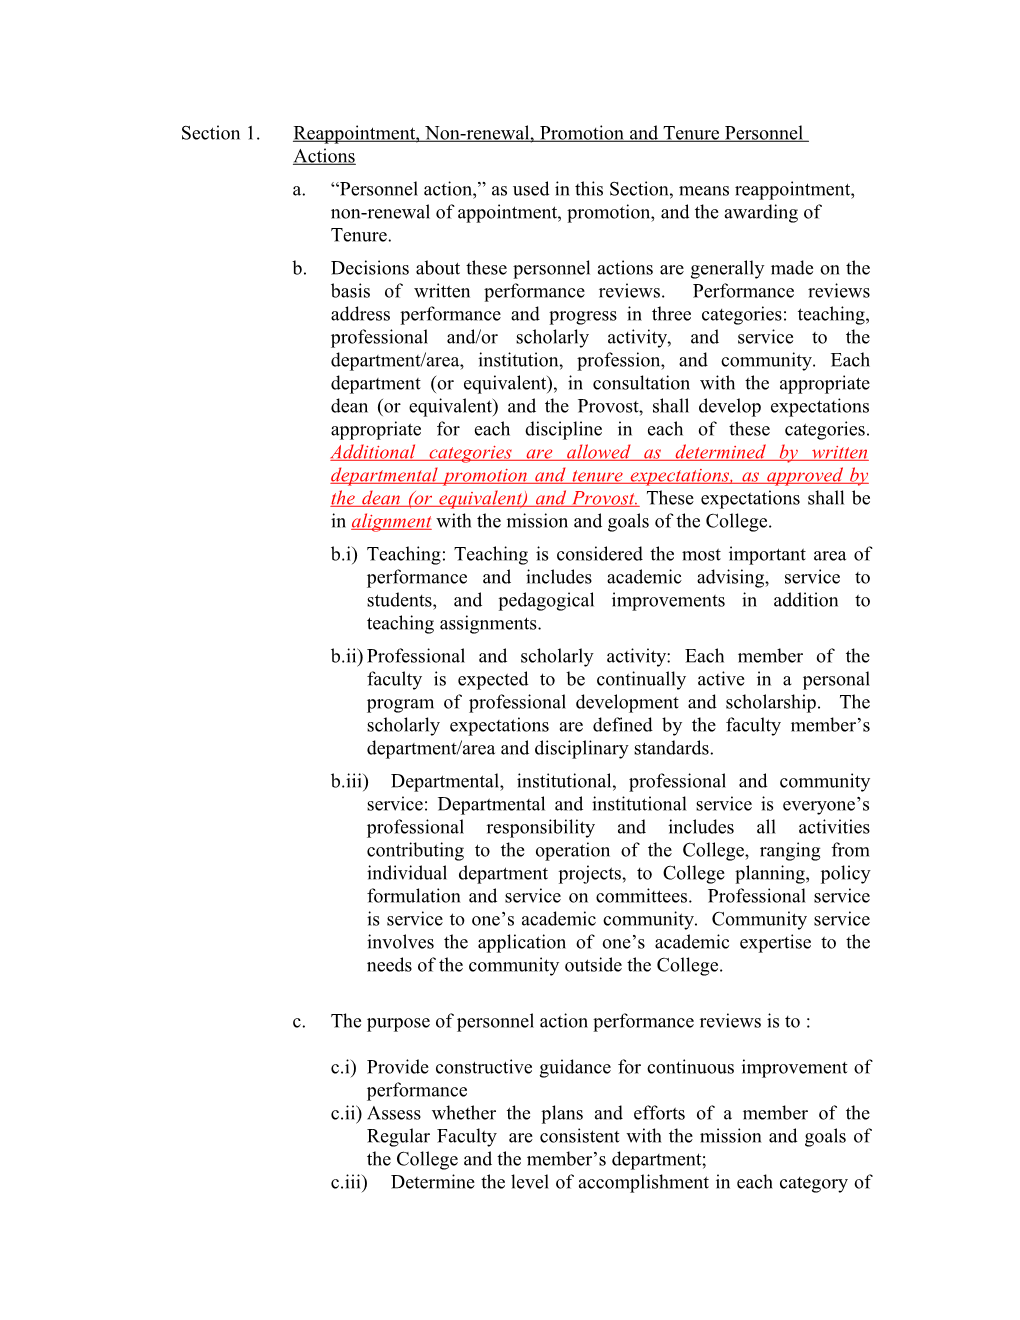 Section 1. Reappointment, Non-Renewal, Promotion and Tenure Personnel Actions